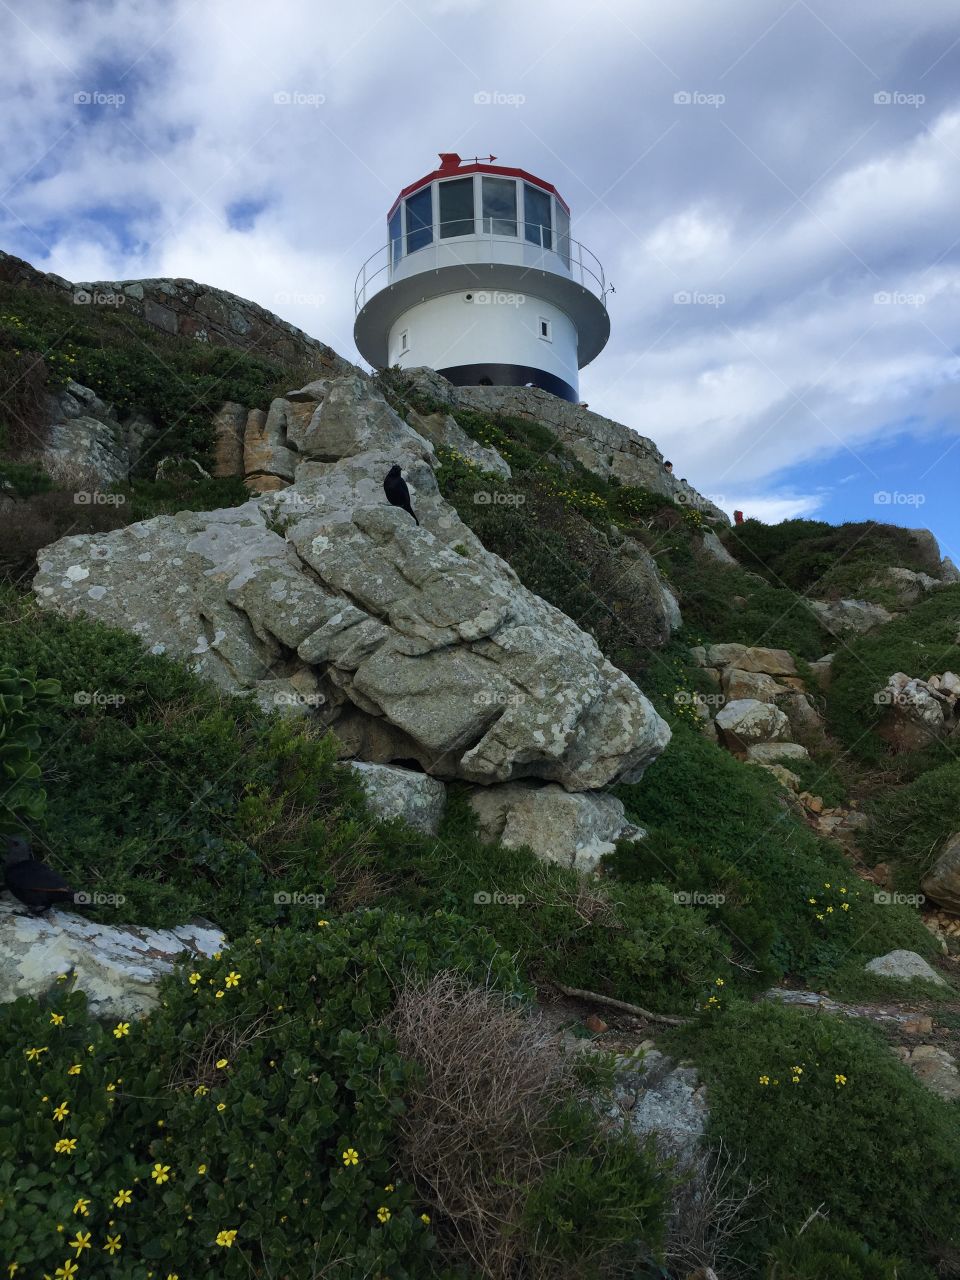 Cape of good hope lighthouse